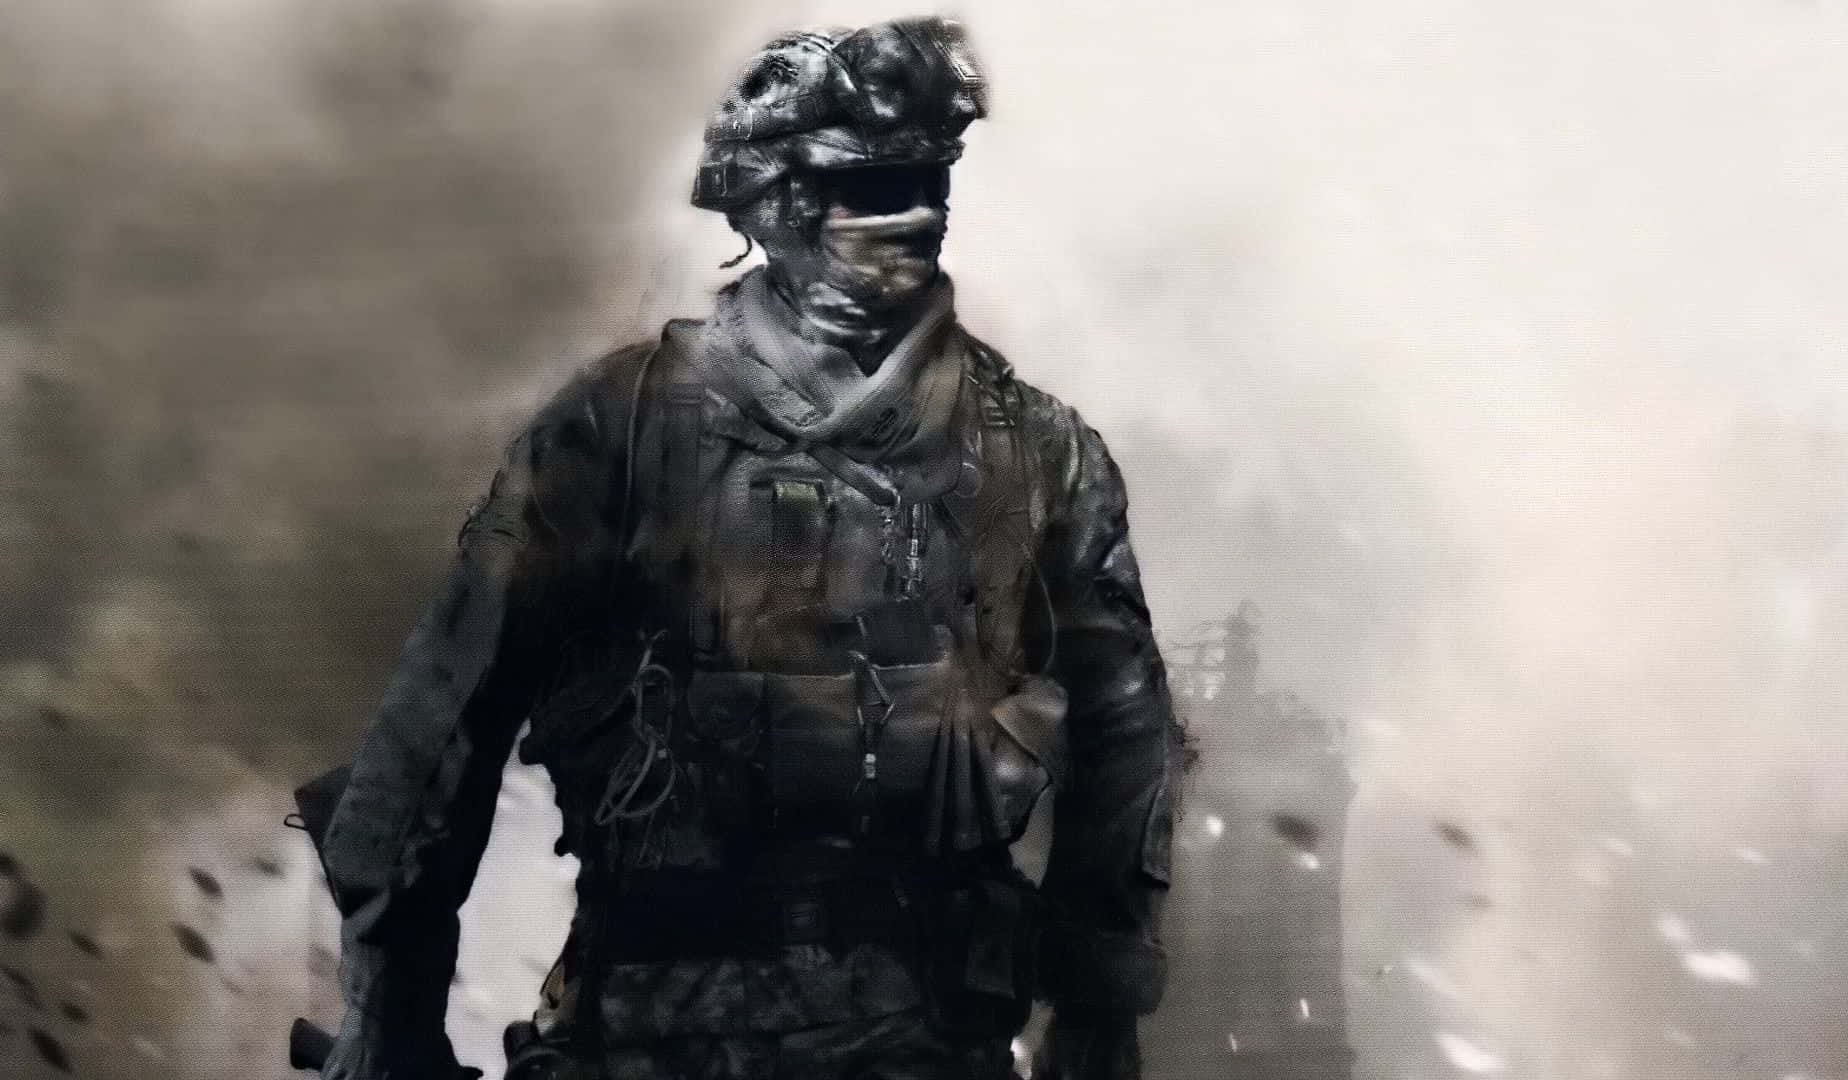 Intense Call of Duty Soldiers in Action Wallpaper